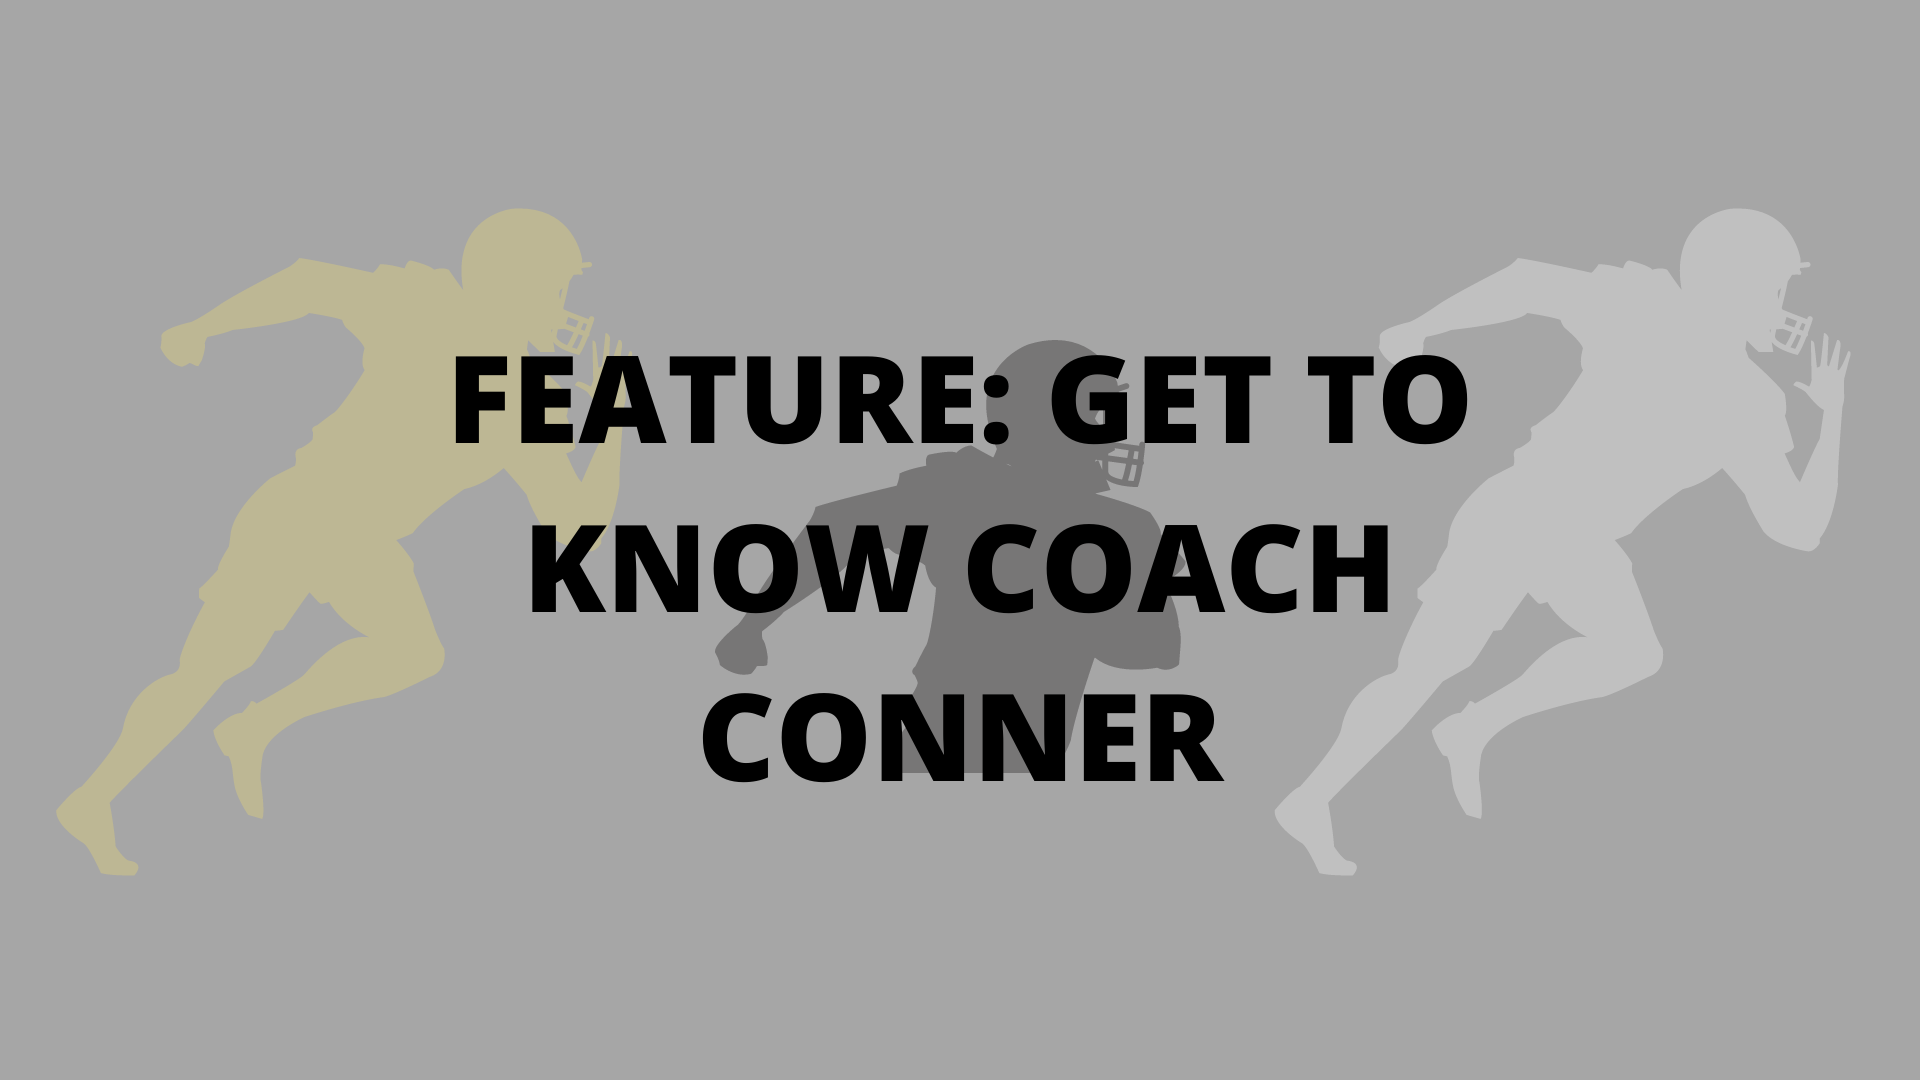 FEATURE: GET TO KNOW COACH CONNER